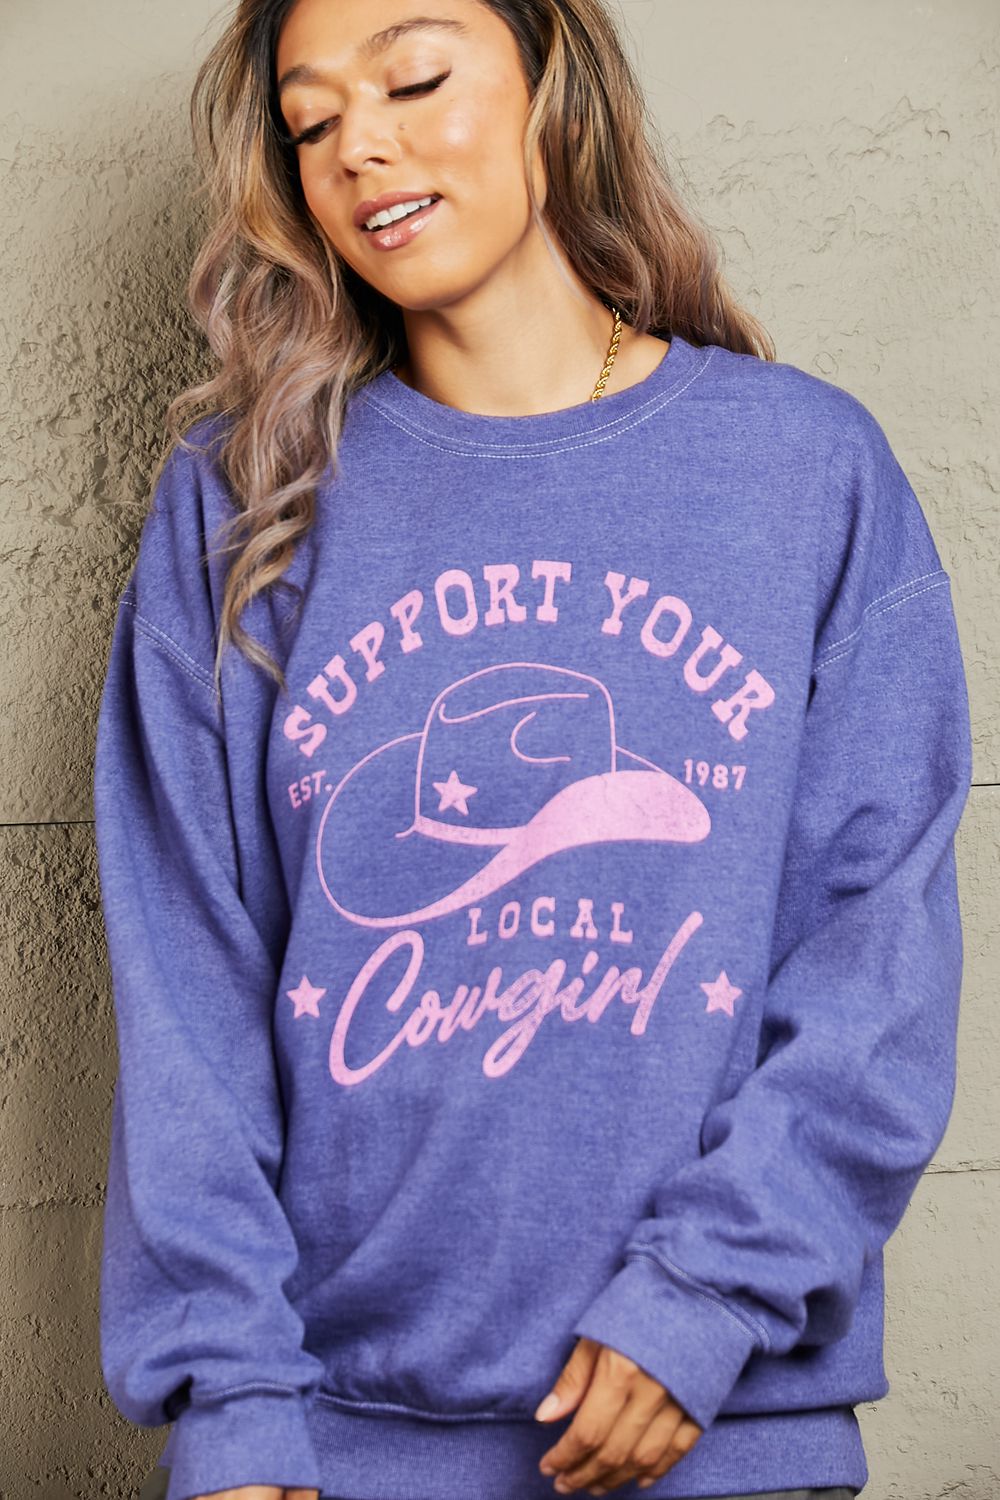 "Support Your Local Cowgirl" Oversized Crewneck Sweatshirt